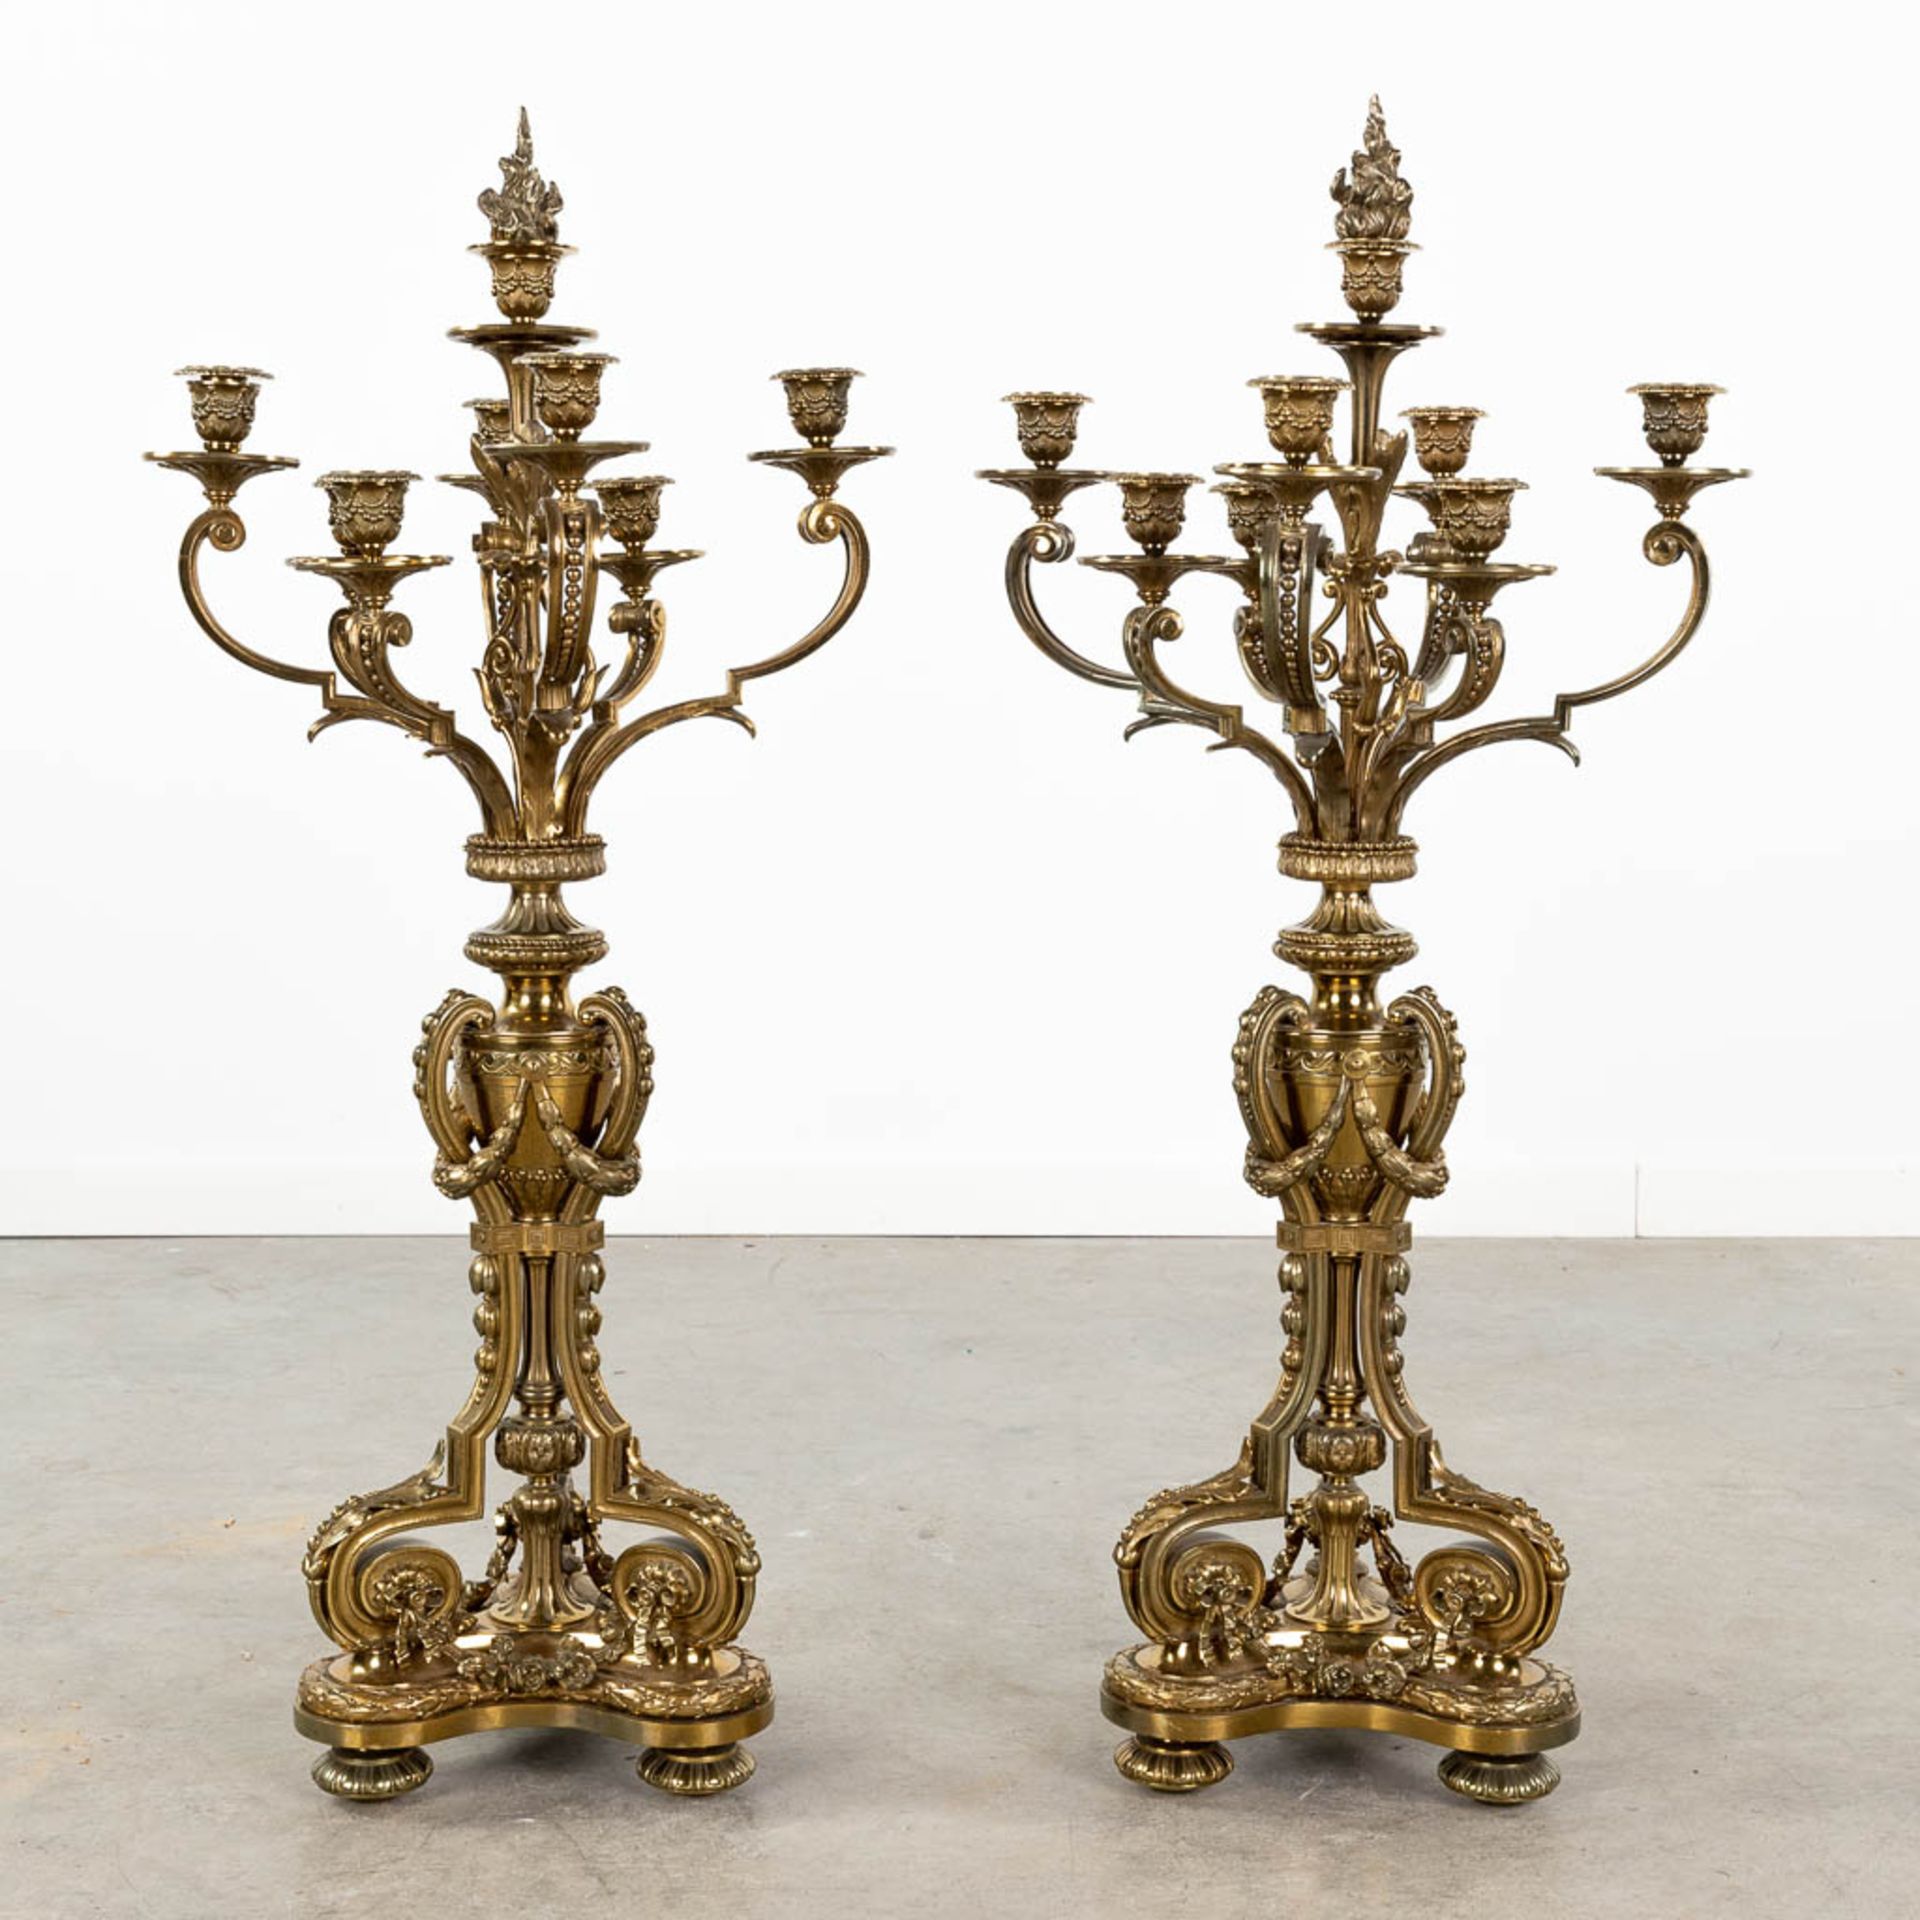 A pair of large neoclassical candelabra made of polished bronze. (L:30 x W:30 x H:90 x D:42,5 cm) - Image 5 of 12